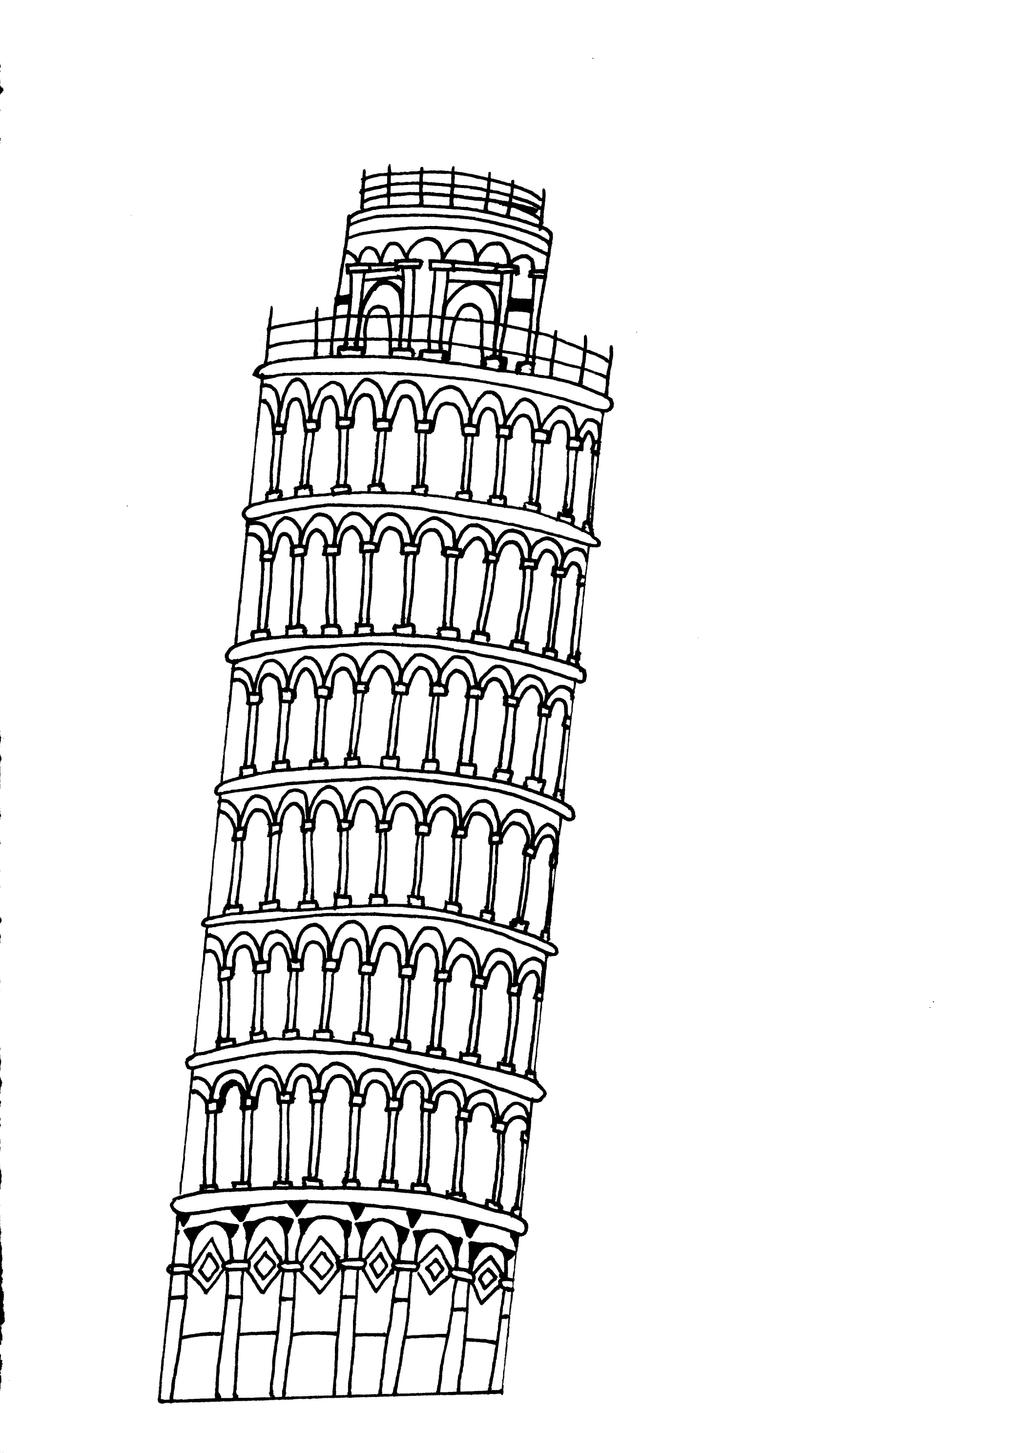 Leaning Tower of Pisa Detail by EmzoCreations on DeviantArt